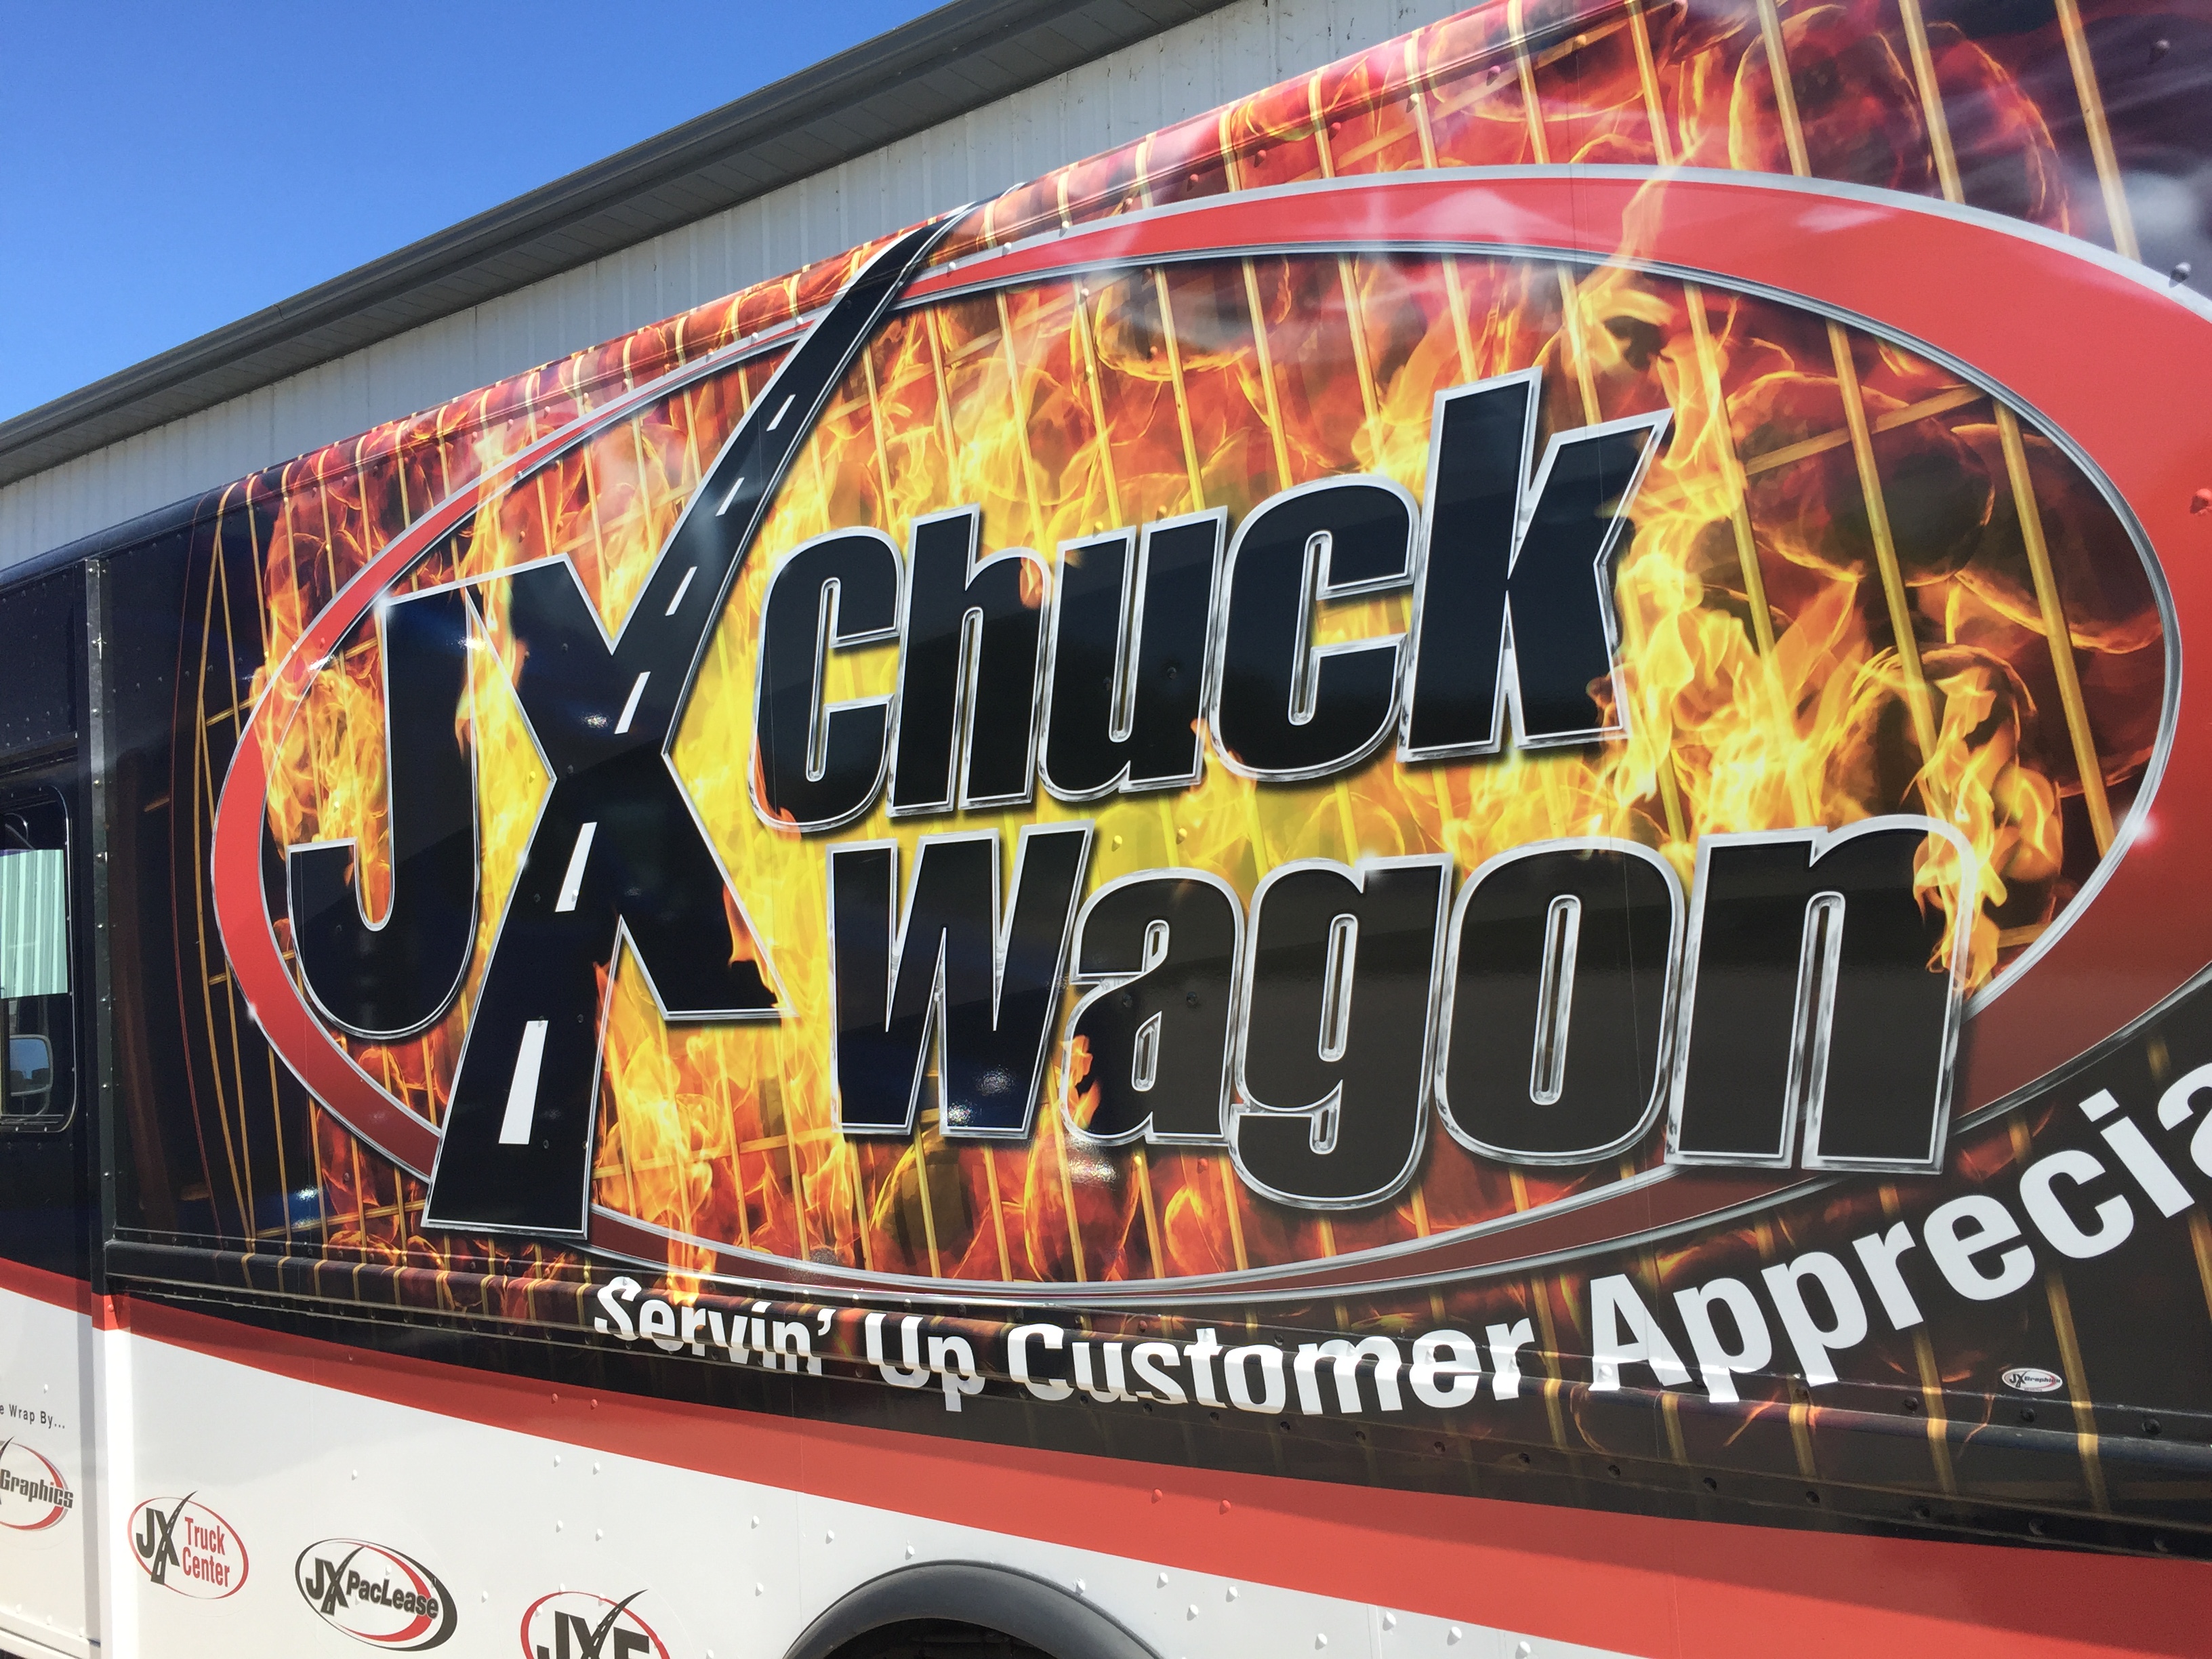 The popular JX Chuck Wagon served up coffee and donuts to attendees during registration and staging